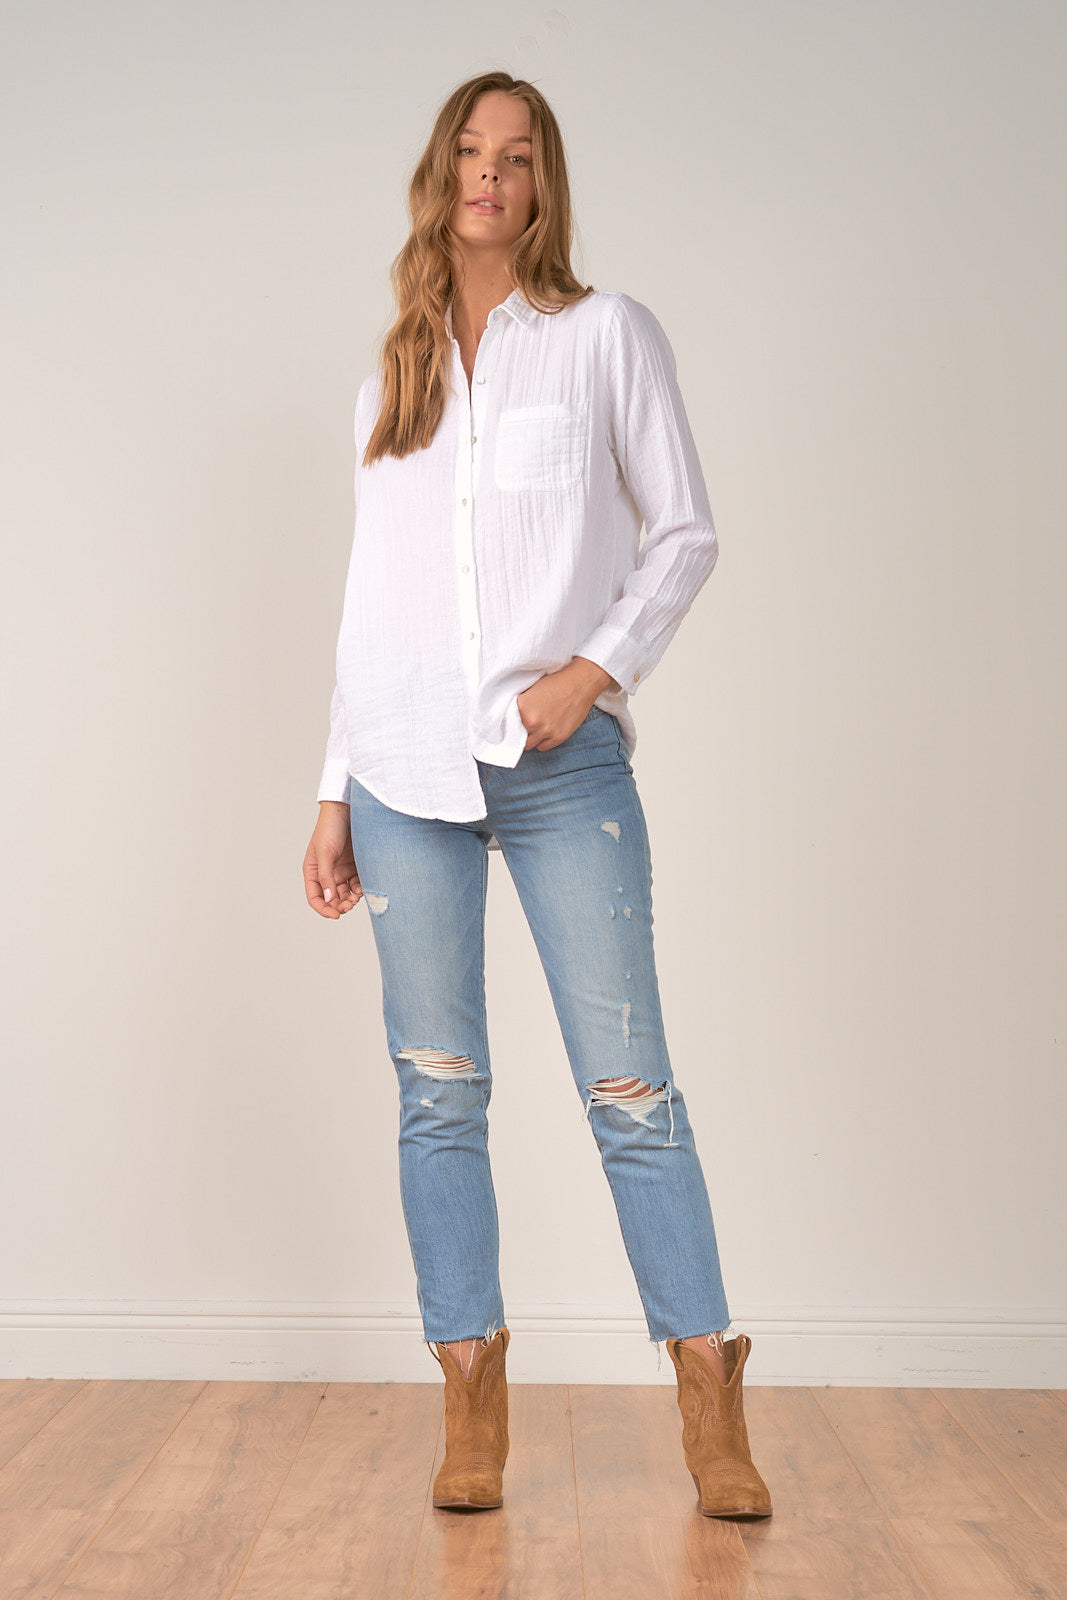 SUMMER'S END BLOUSE